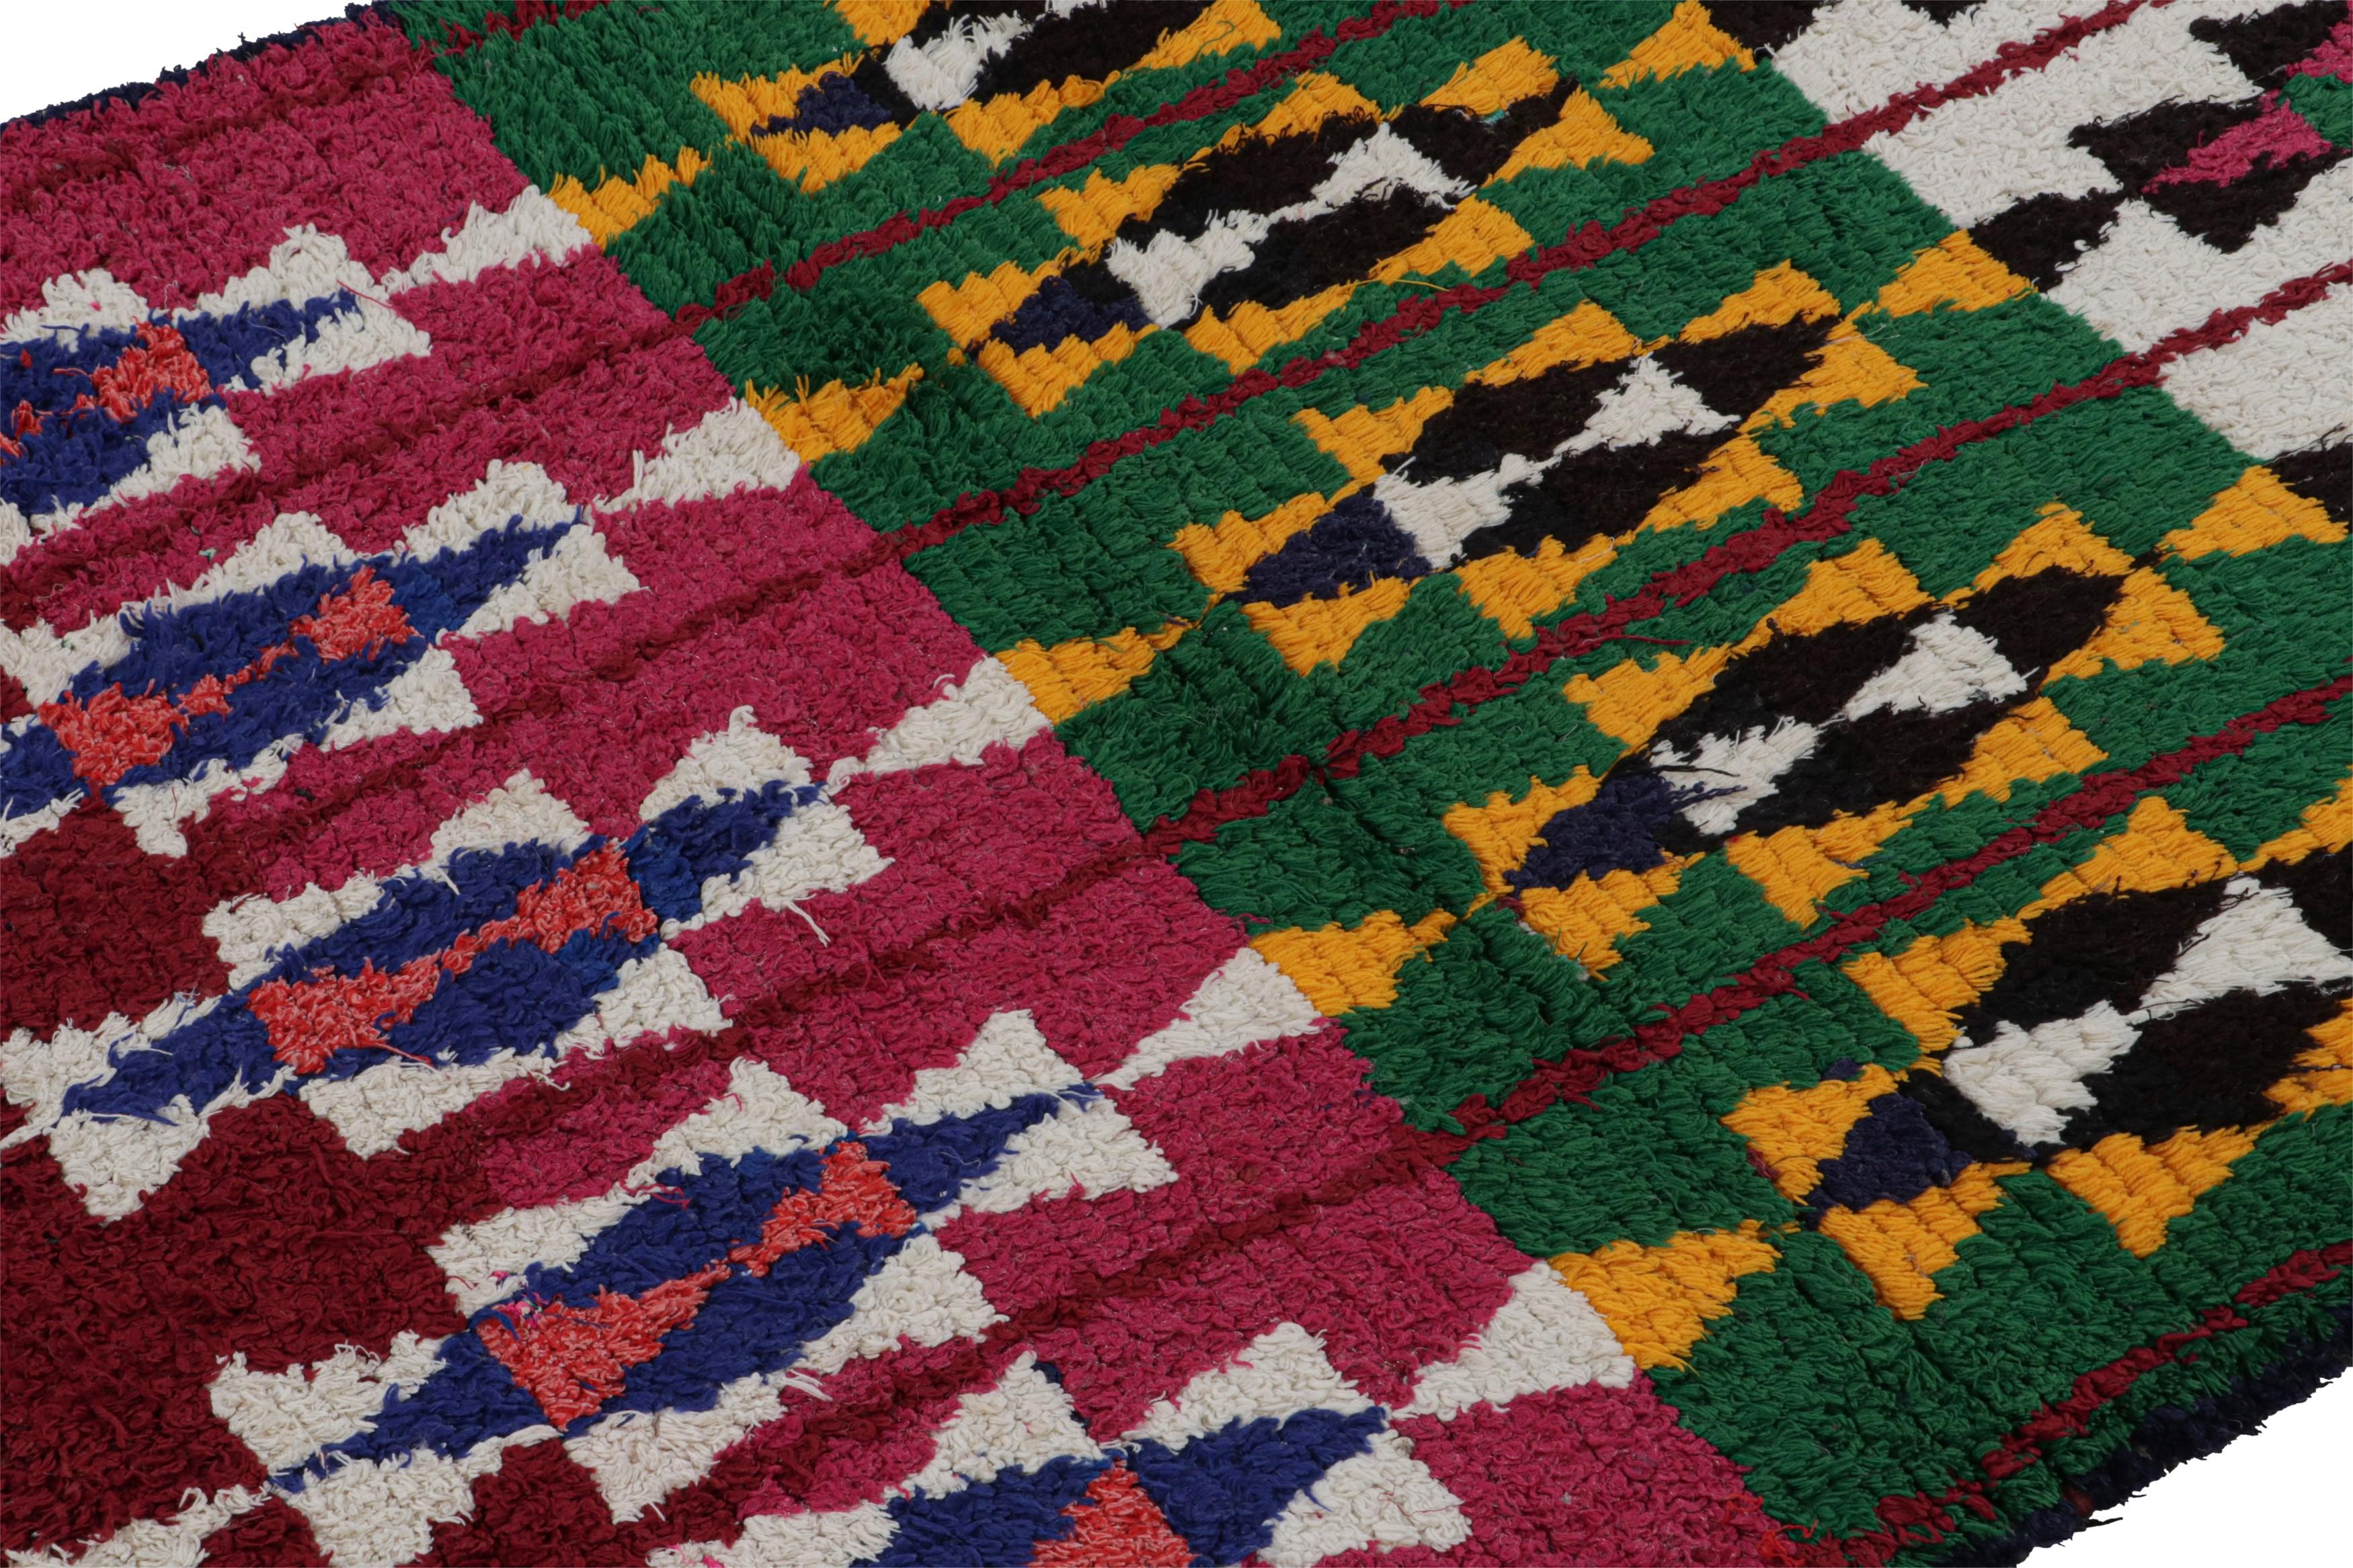 Hand-Woven 1950s Azilal Moroccan Boucherouite Rug with Polychromatic Pattern by Rug & Kilim For Sale